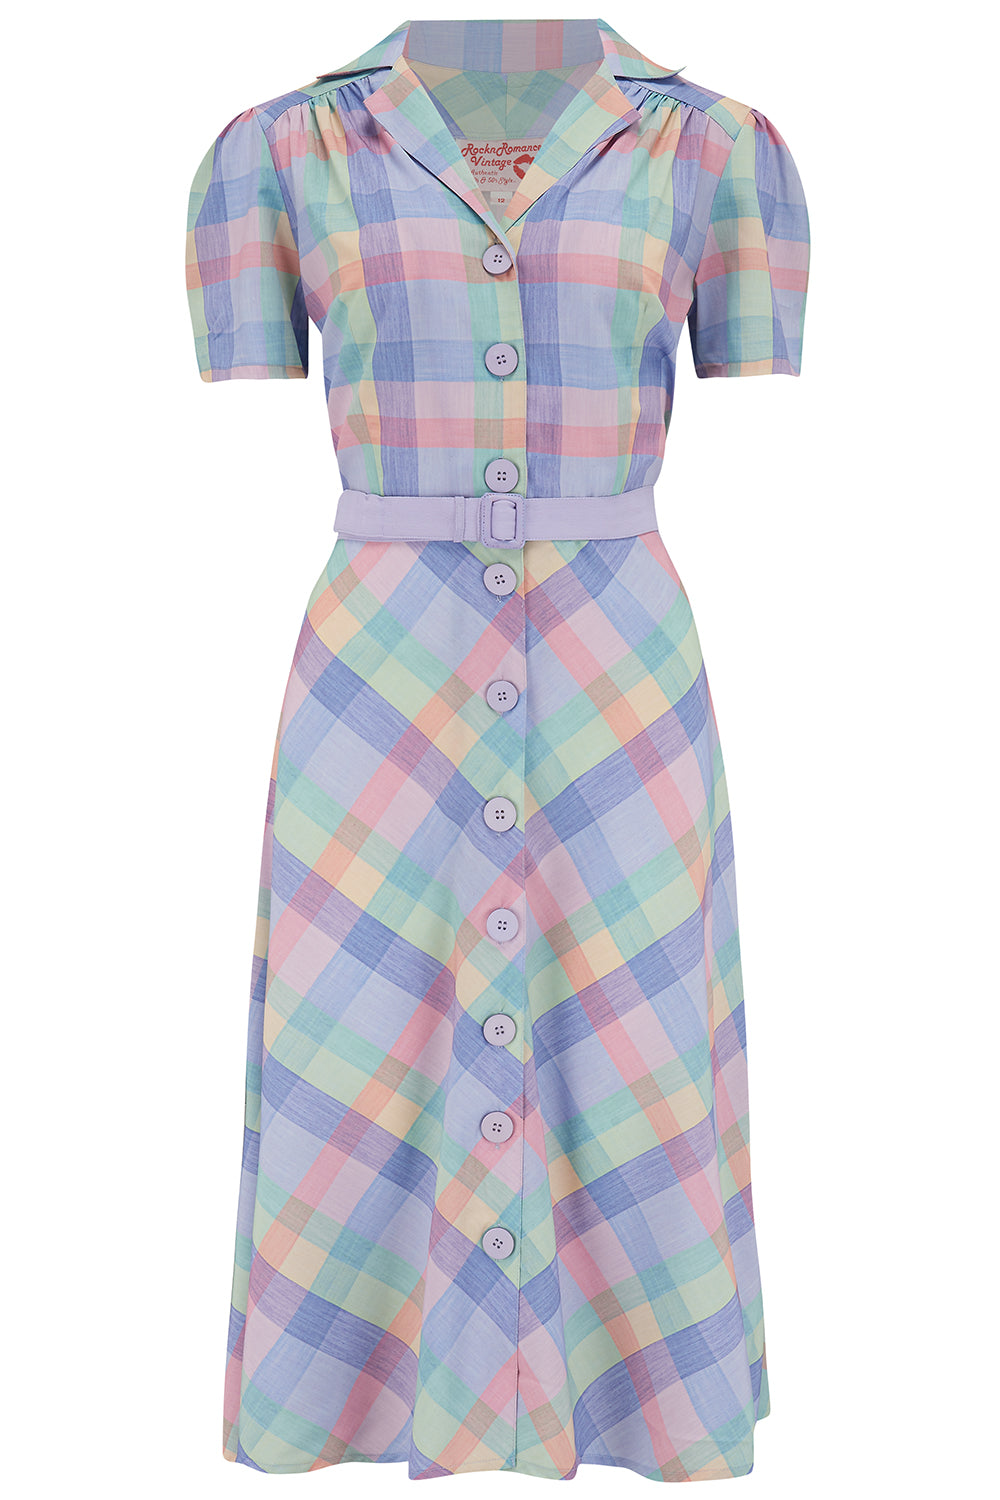 **Sample Sale** The "Charlene" Shirtwaister Dress in Summer Check Print, True & Authentic 1950s Vintage Style - True and authentic vintage style clothing, inspired by the Classic styles of CC41 , WW2 and the fun 1950s RocknRoll era, for everyday wear plus events like Goodwood Revival, Twinwood Festival and Viva Las Vegas Rockabilly Weekend Rock n Romance Rock n Romance